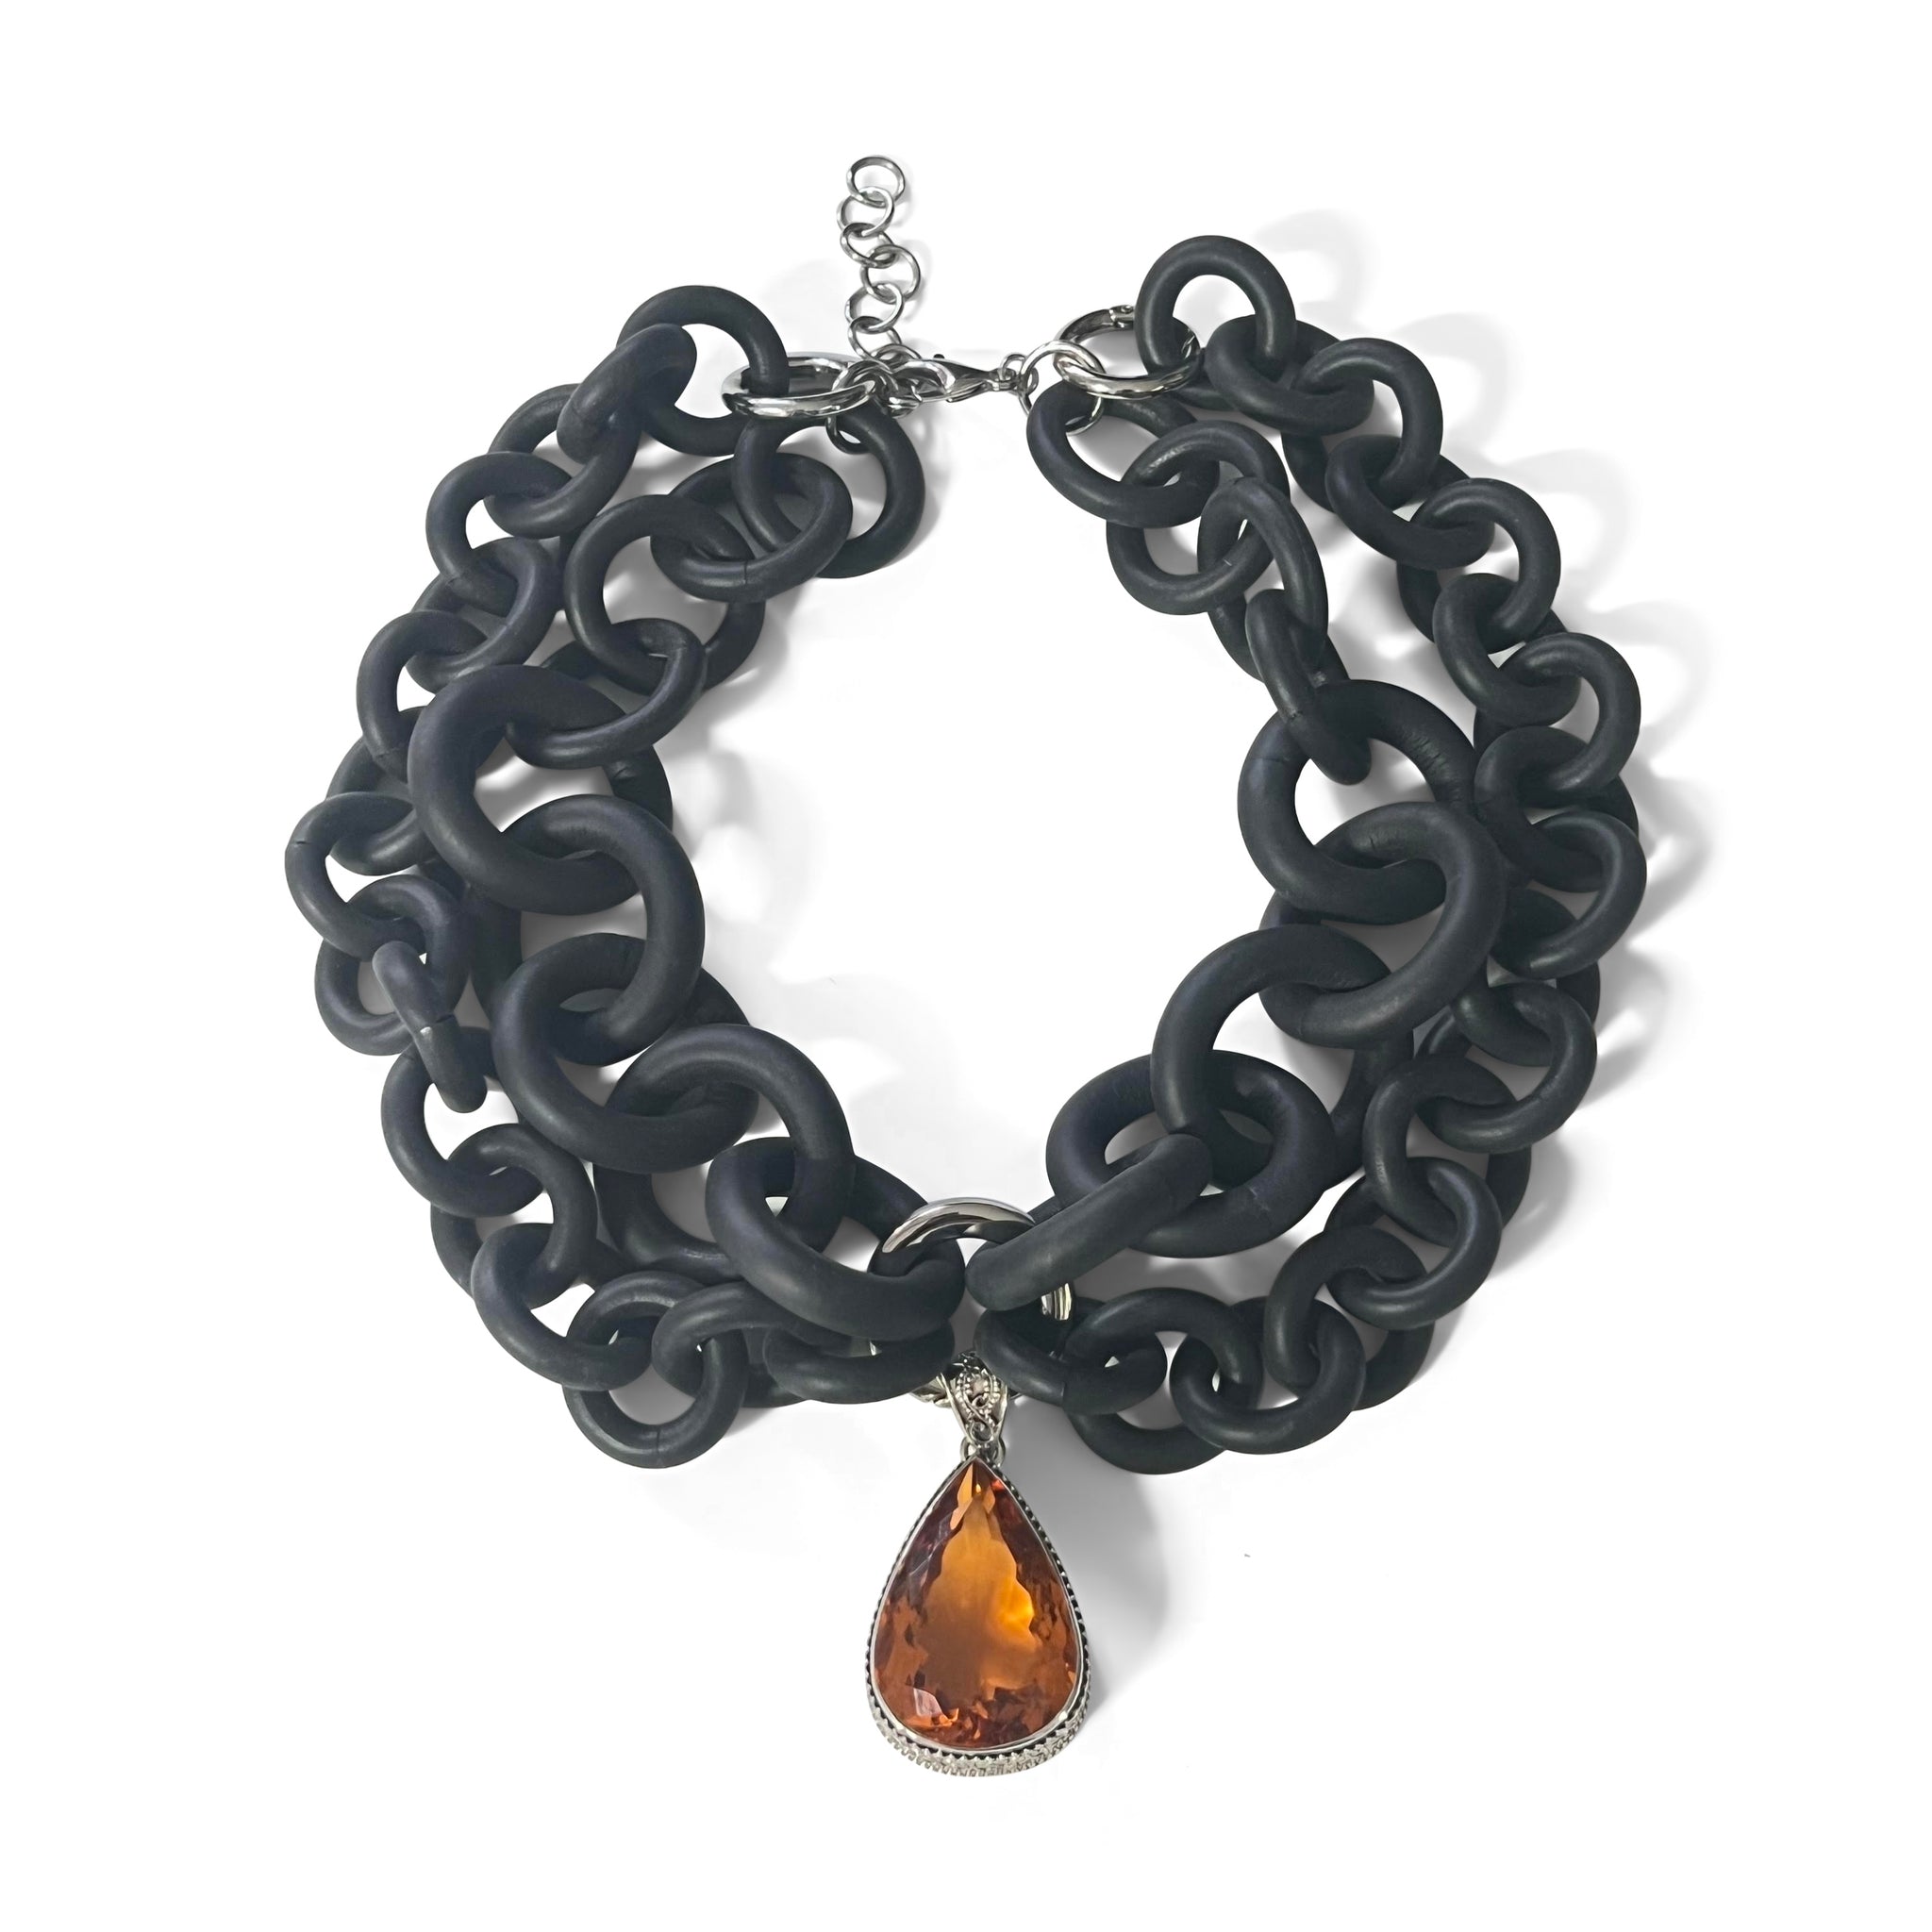 2-STRAND BLACK RUBBER NECKLACE WITH AN ORANGE QUARTZ STONE WRAPPED IN FILIGREE SILVER. by NYET Jewelry.